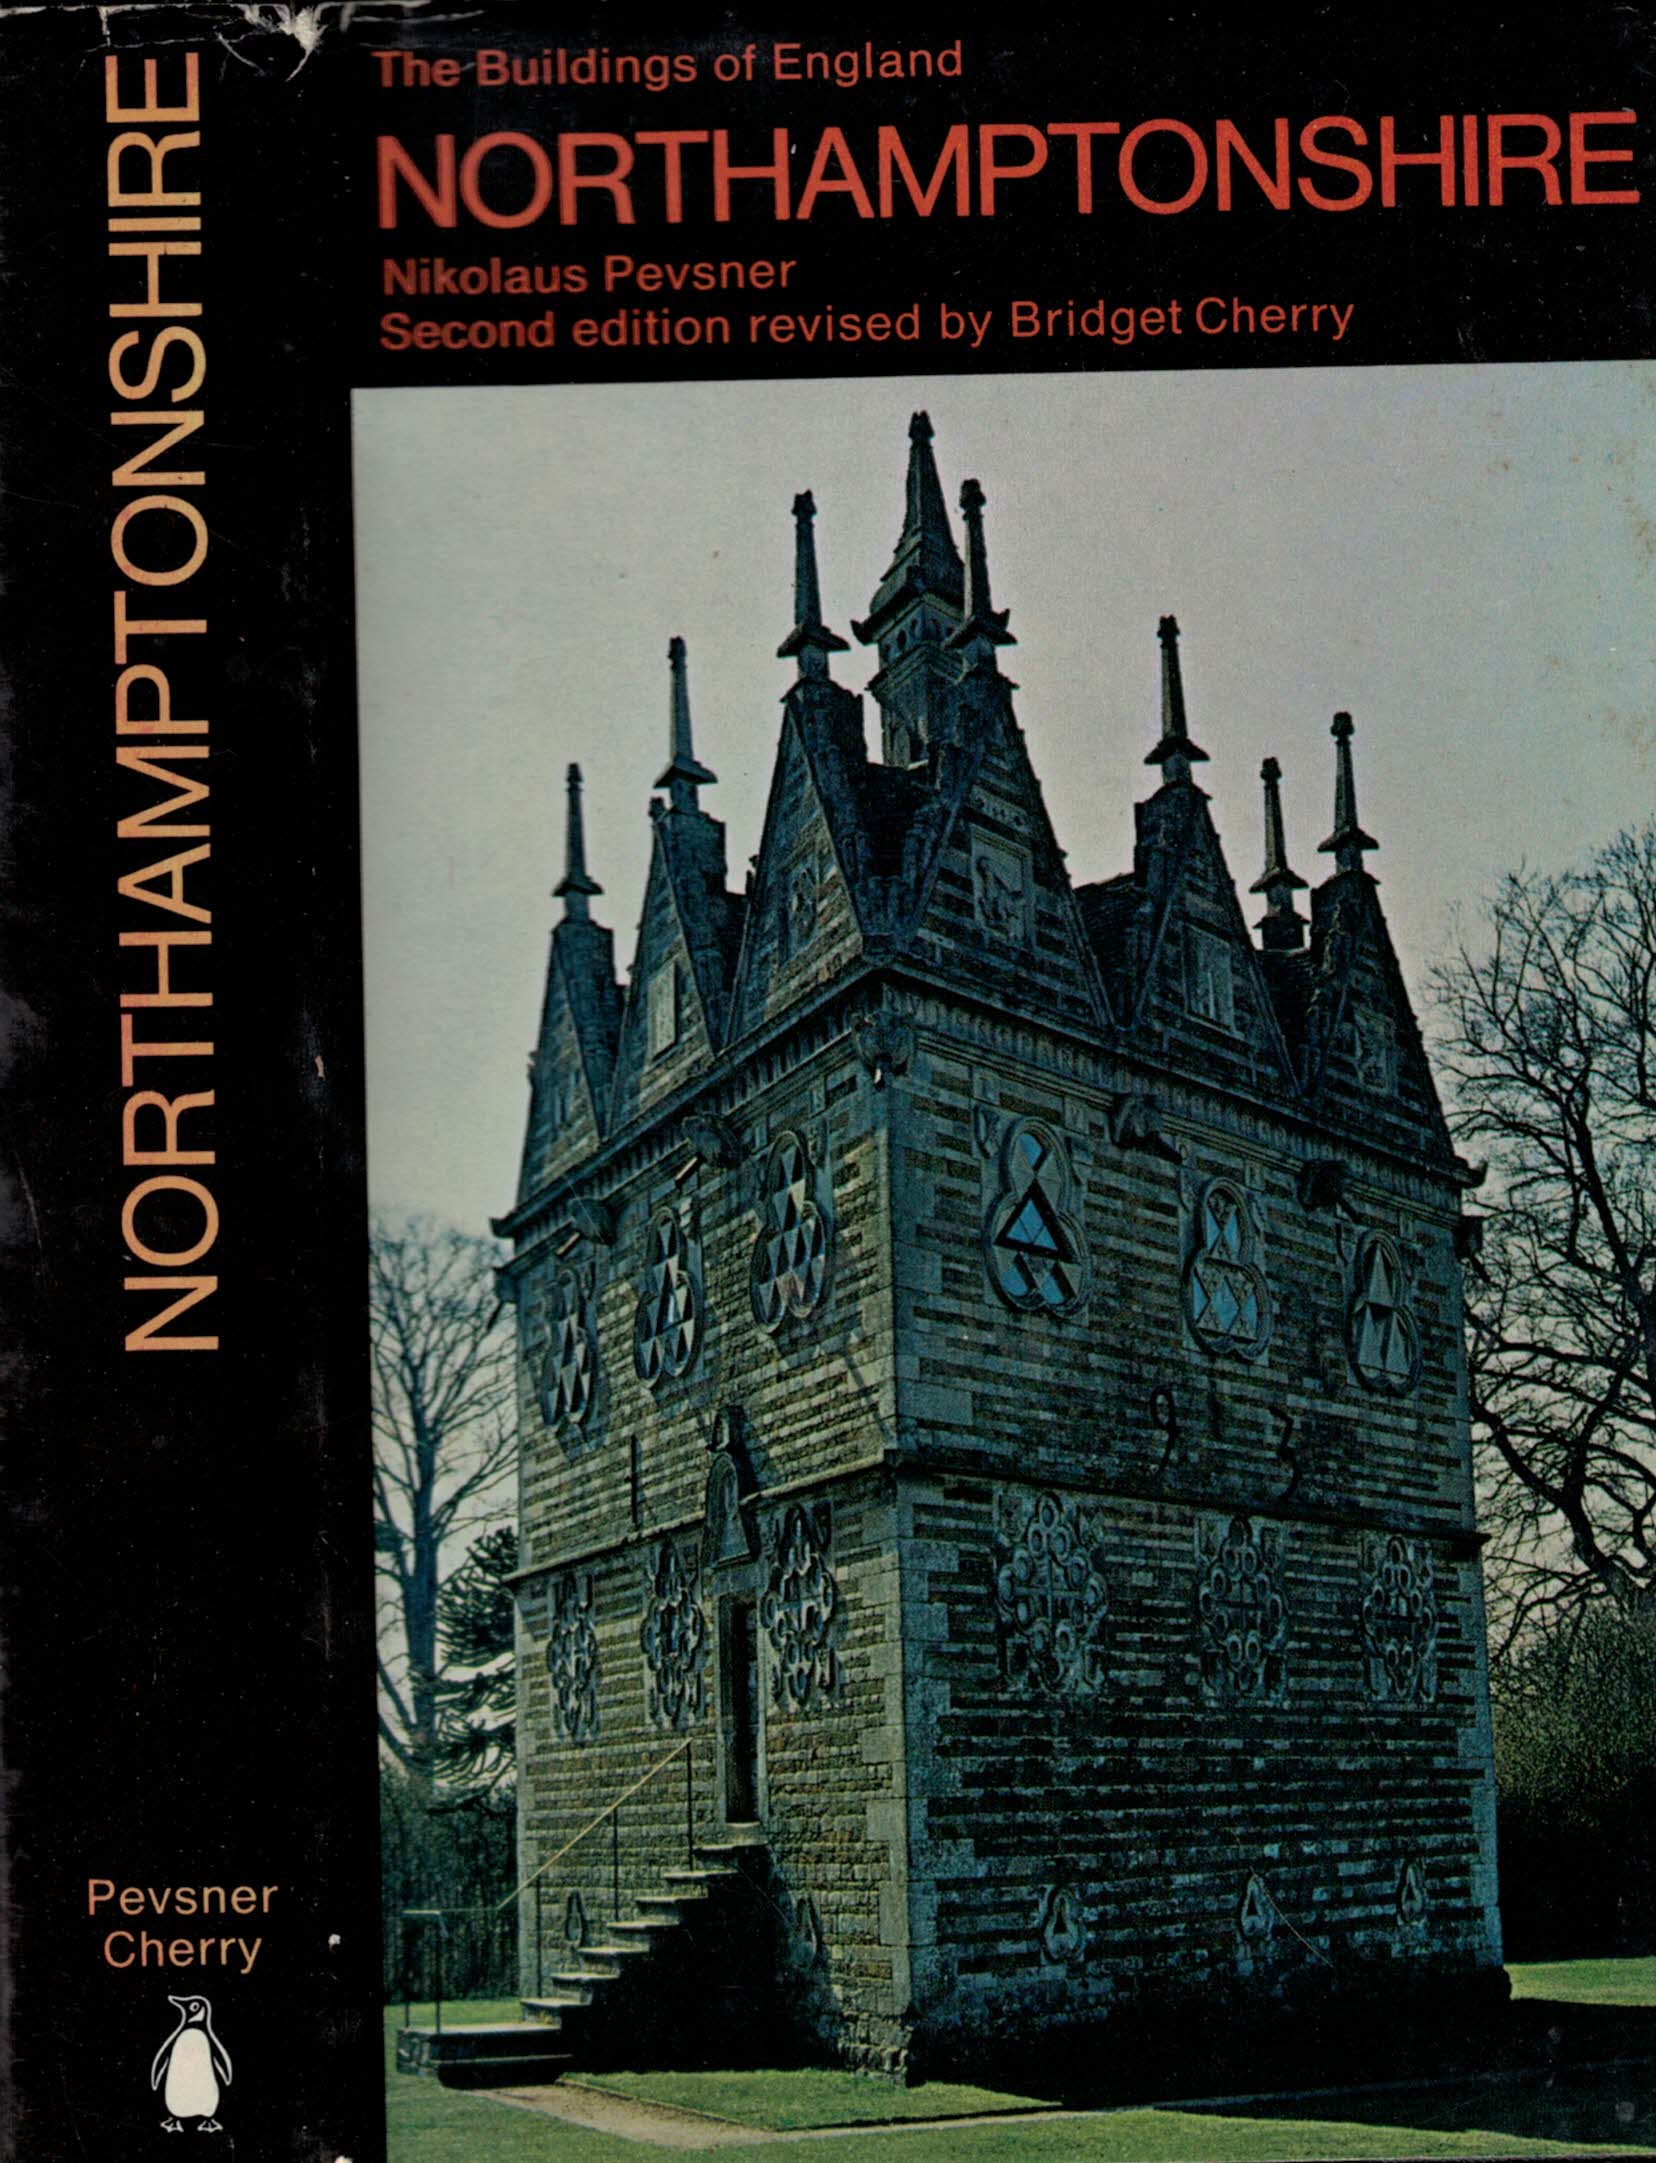 Northamptonshire. The Buildings of England. BE 22. 1973.